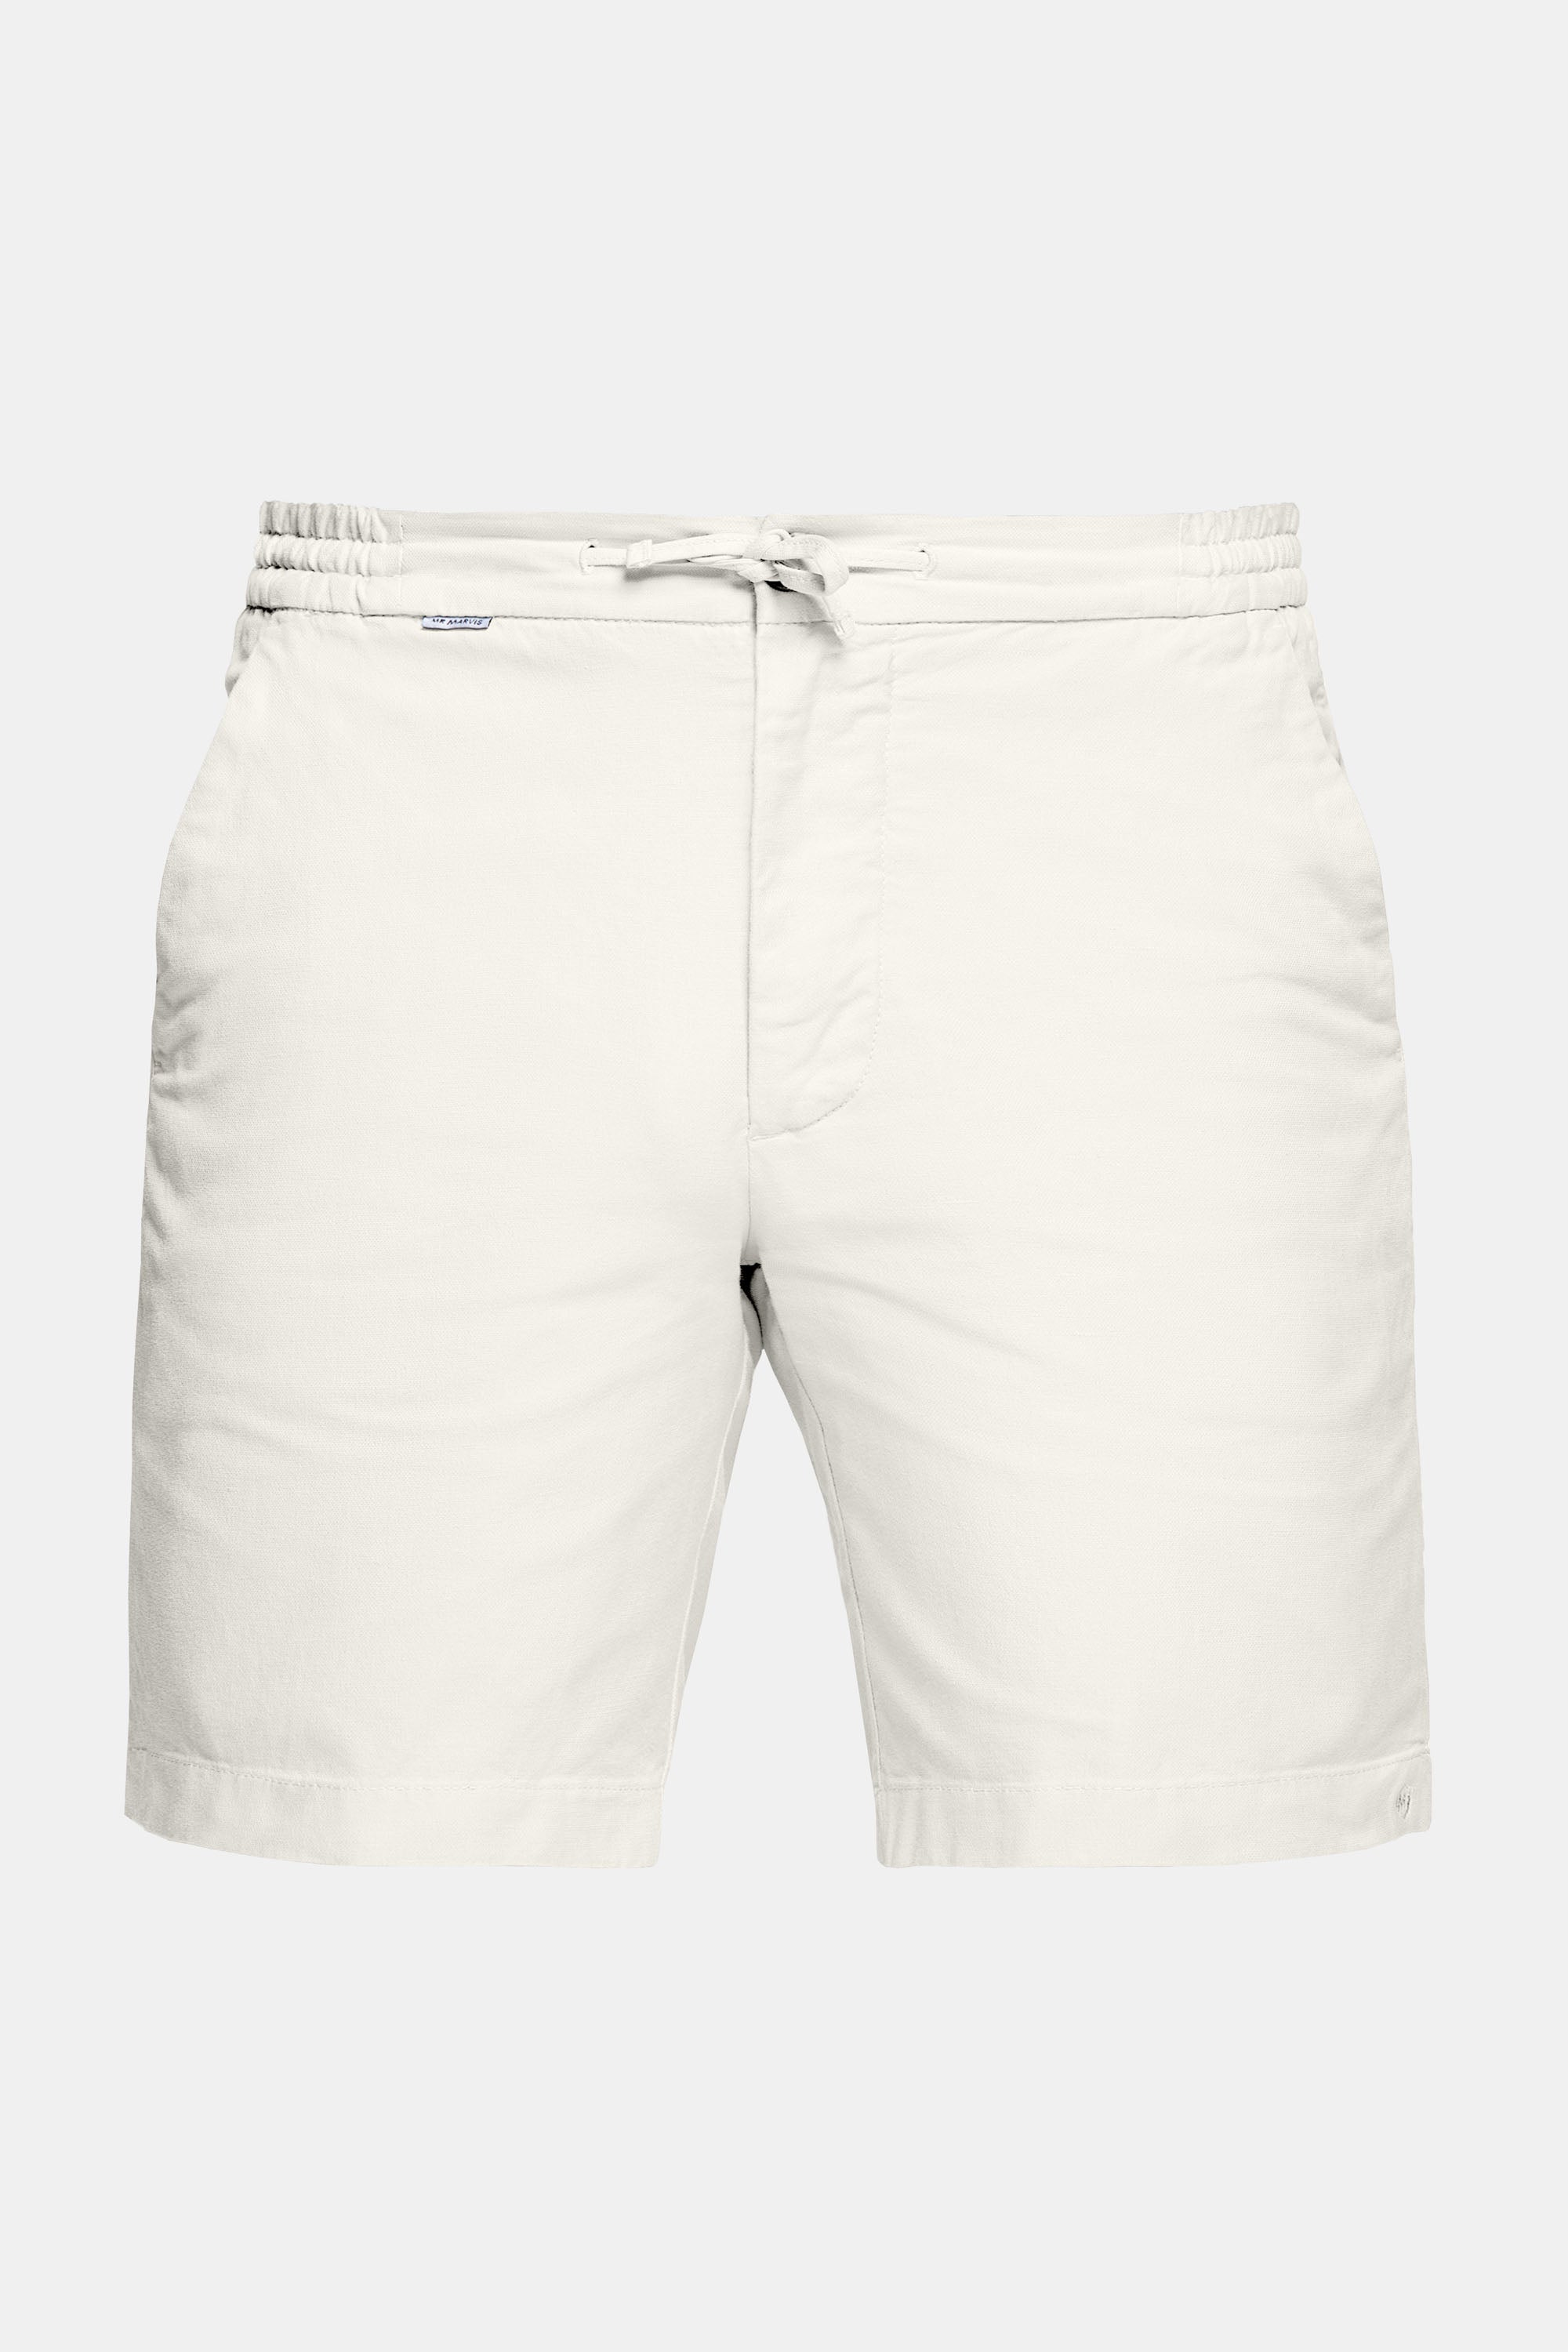 Coconuts | Men's Off White Linen Shorts | MR MARVIS